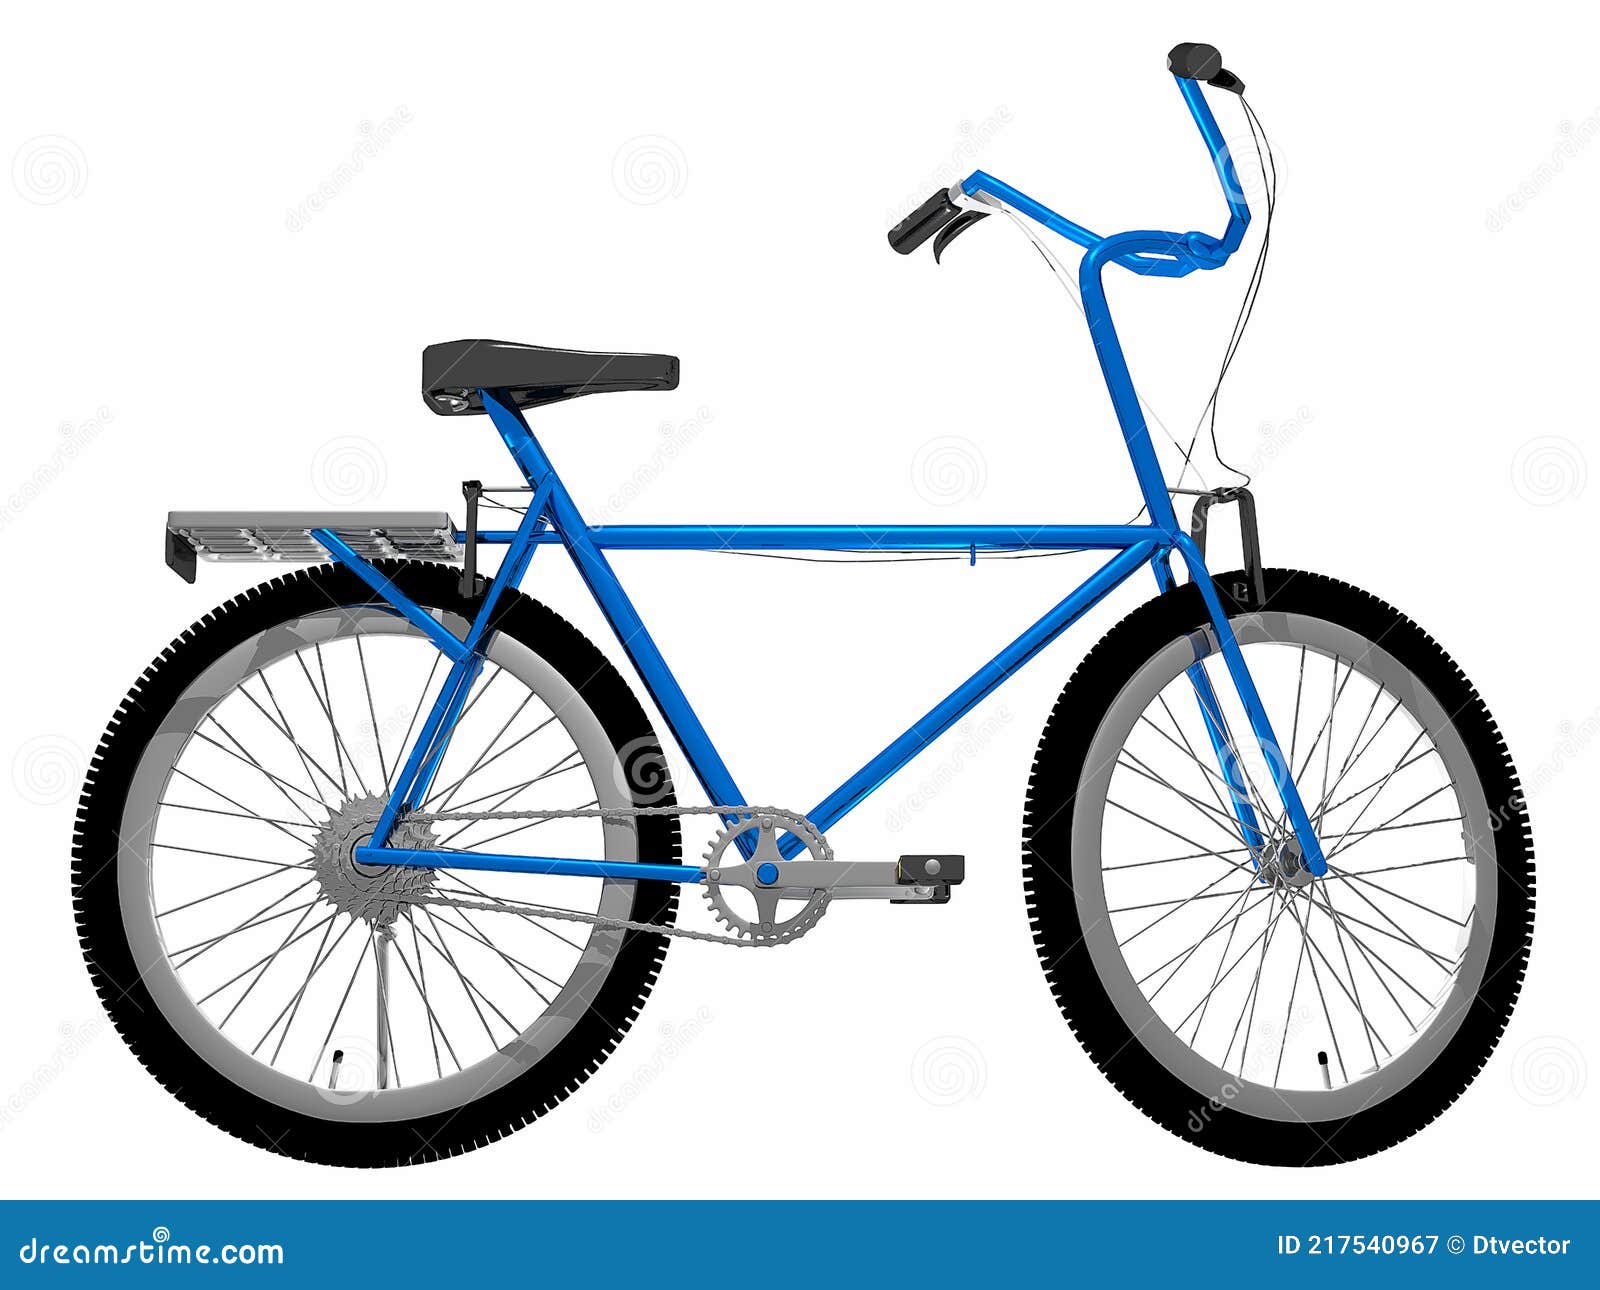 bicycle blue front view right